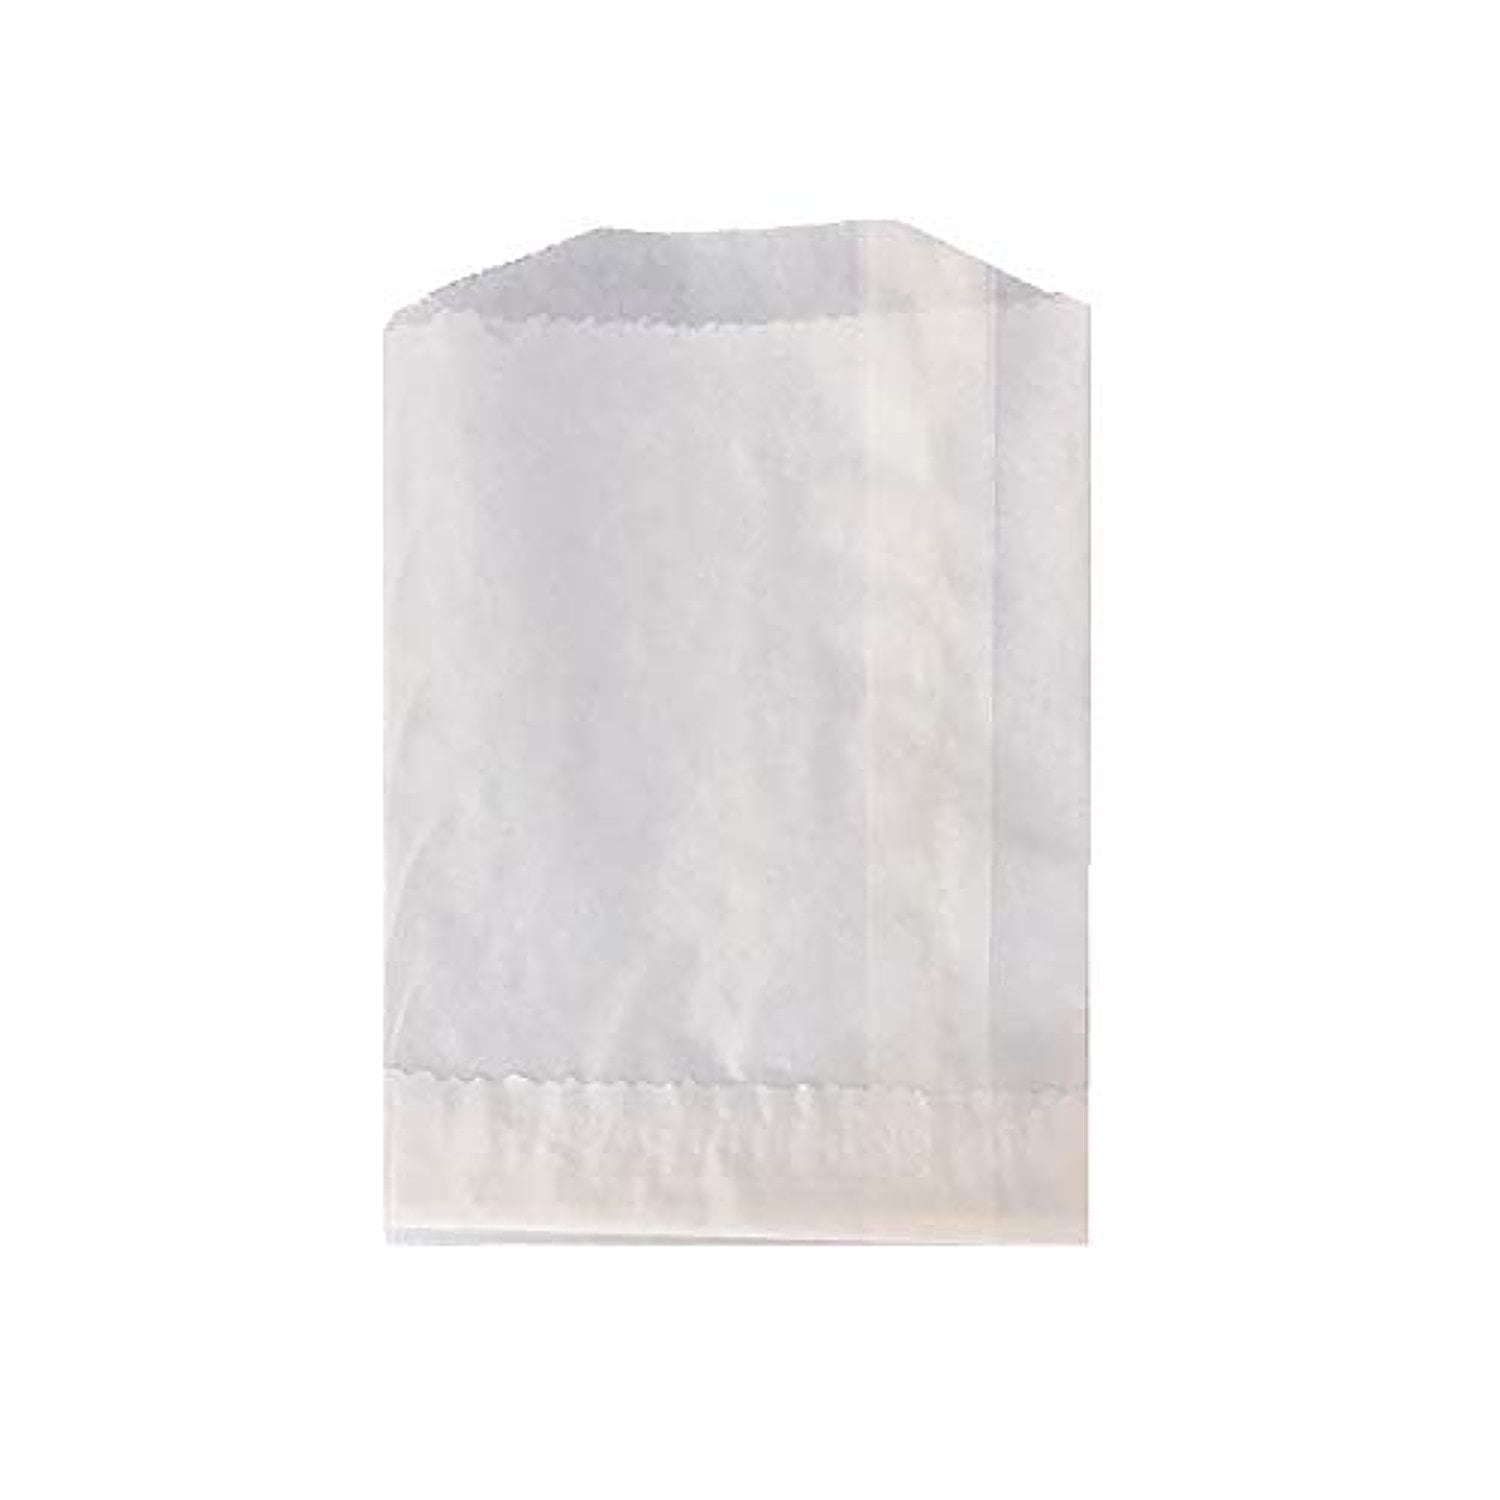 100 White Glassine Flat Bags (7 SIZES Available) | My Craft Supplies